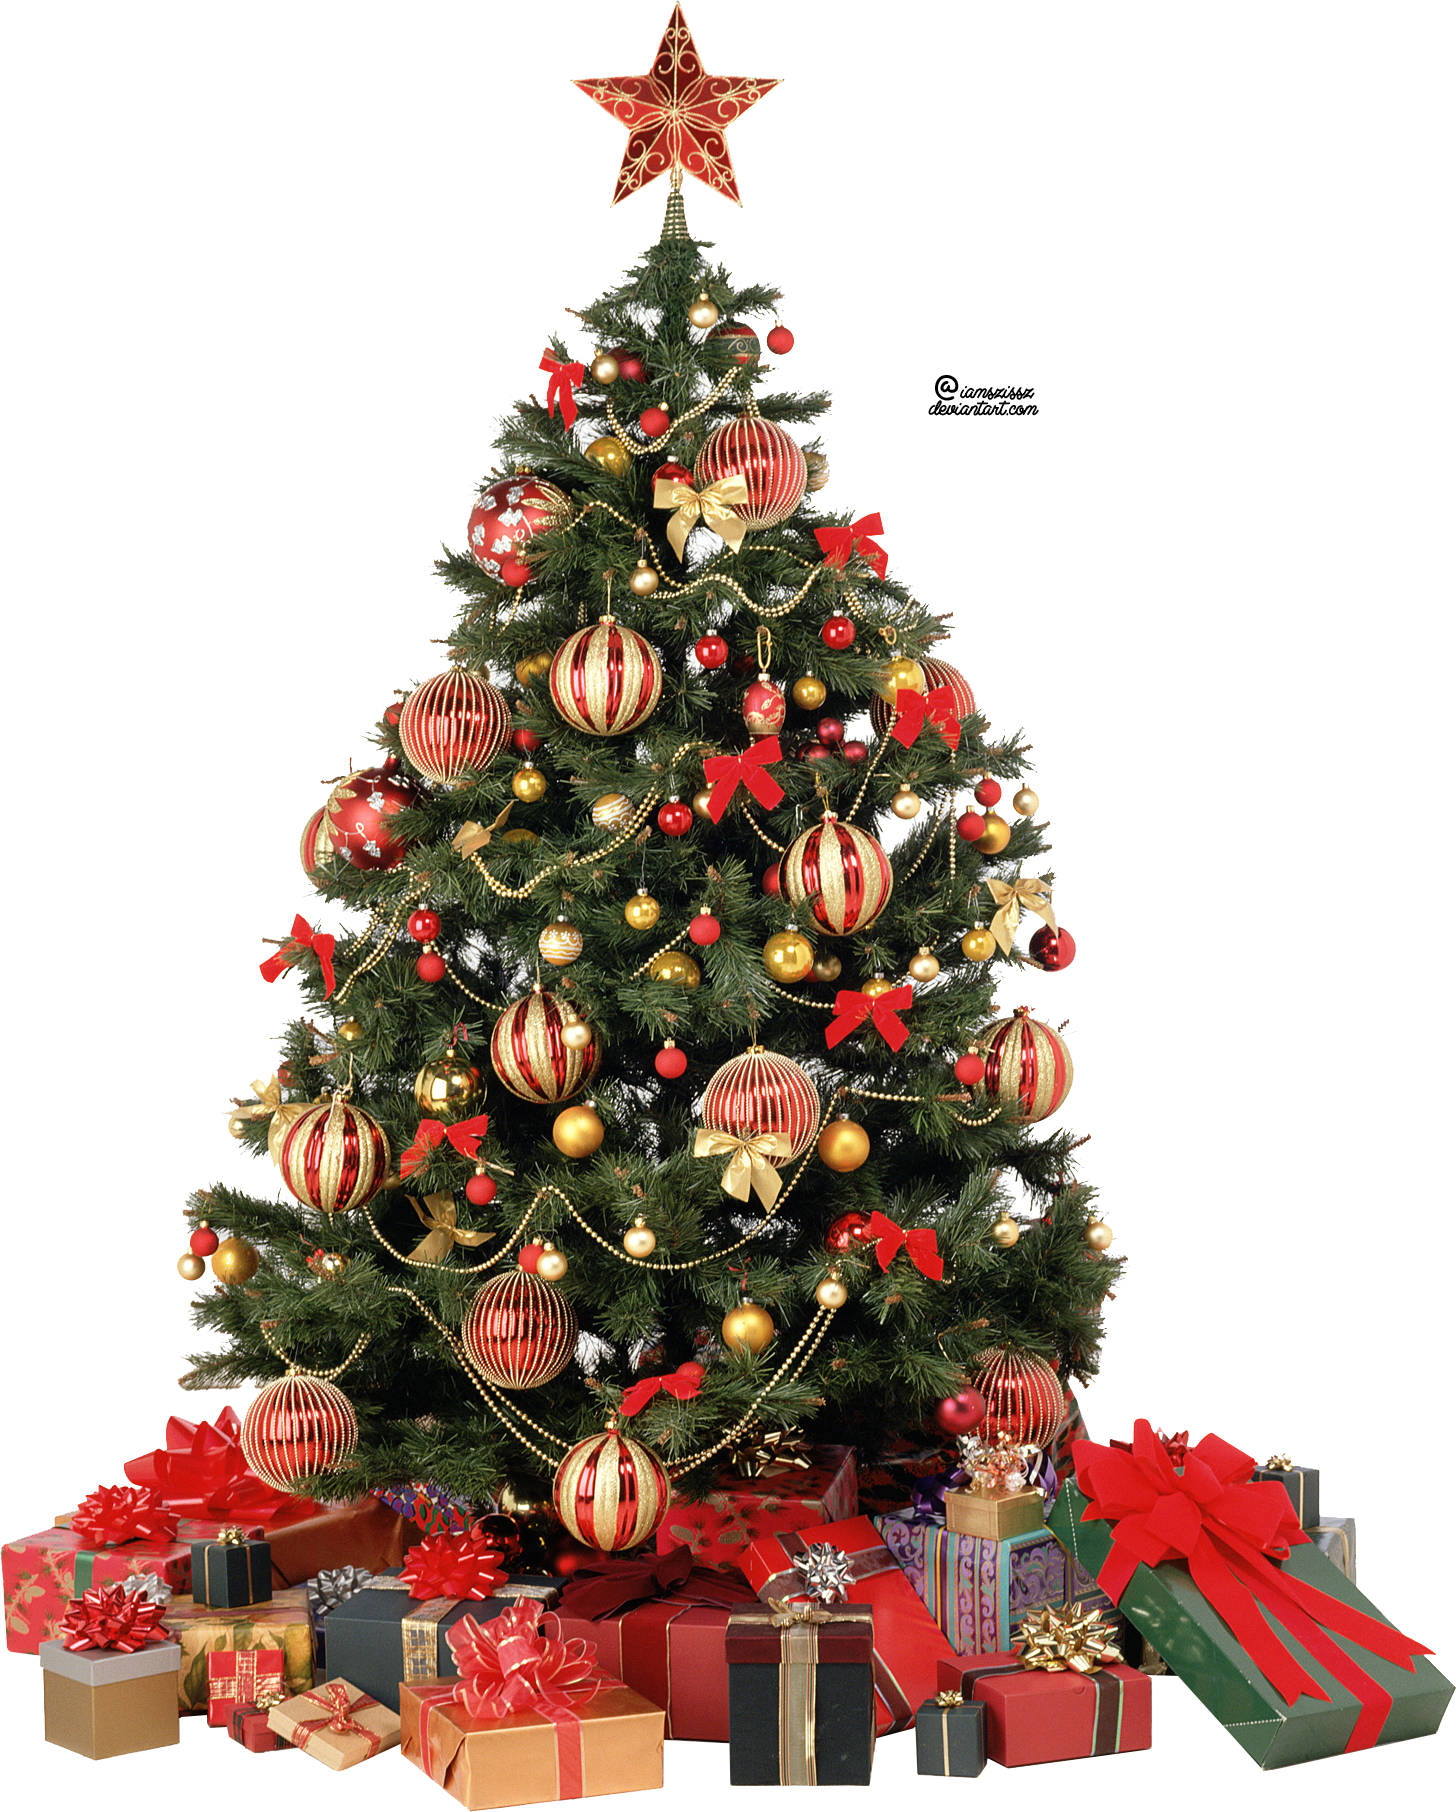 Image - Christmas Tree Decorations With Gifts (1456x1812)